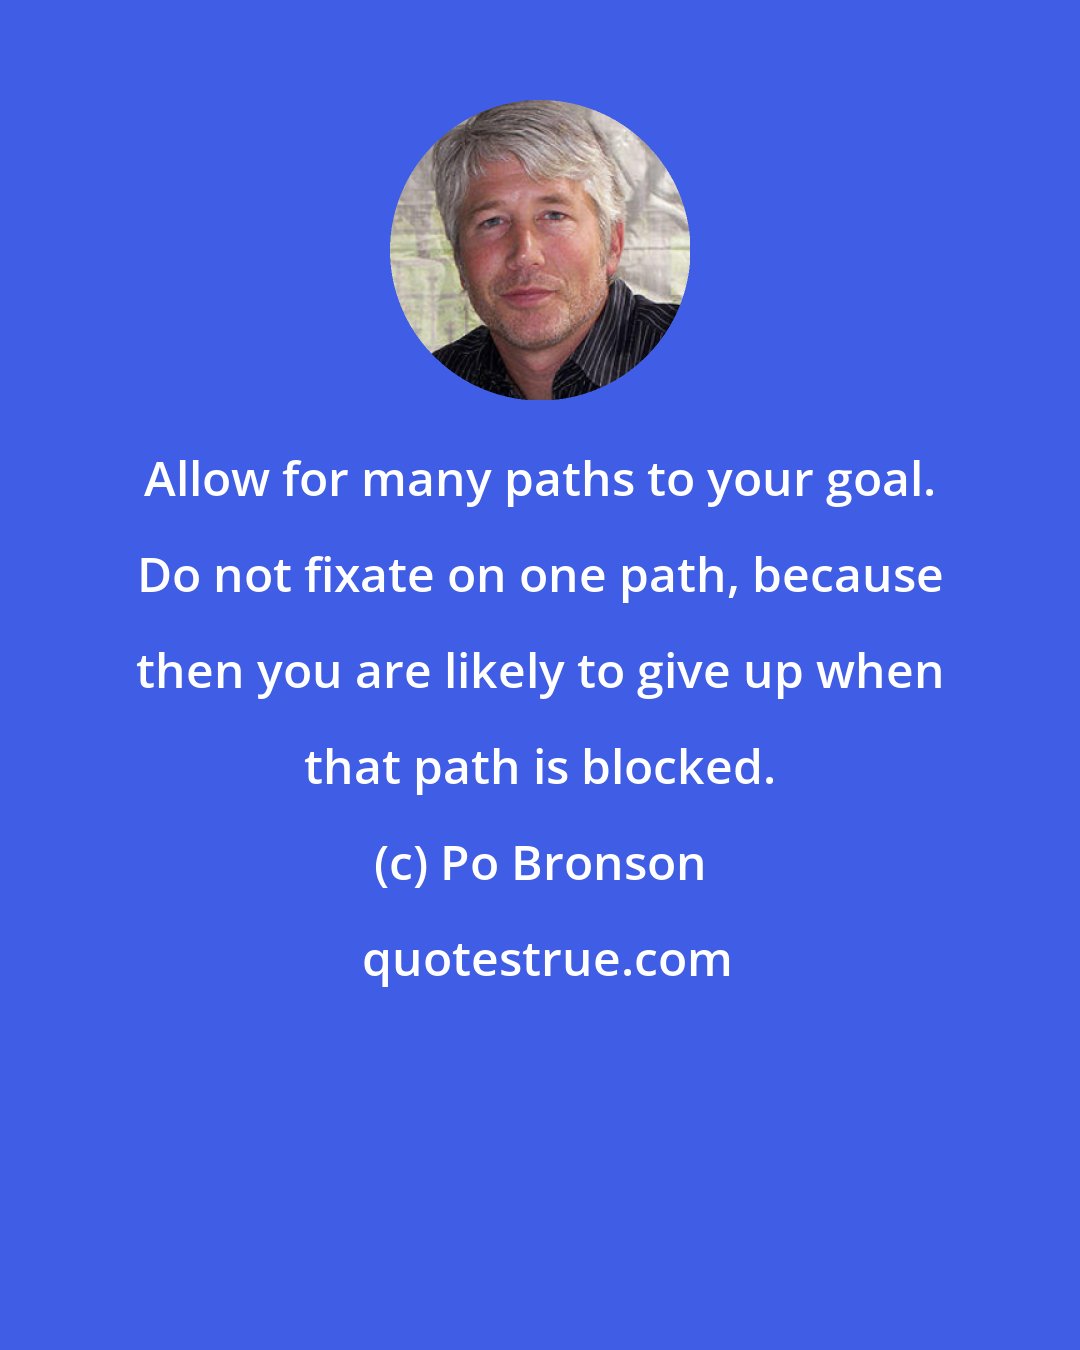 Po Bronson: Allow for many paths to your goal. Do not fixate on one path, because then you are likely to give up when that path is blocked.